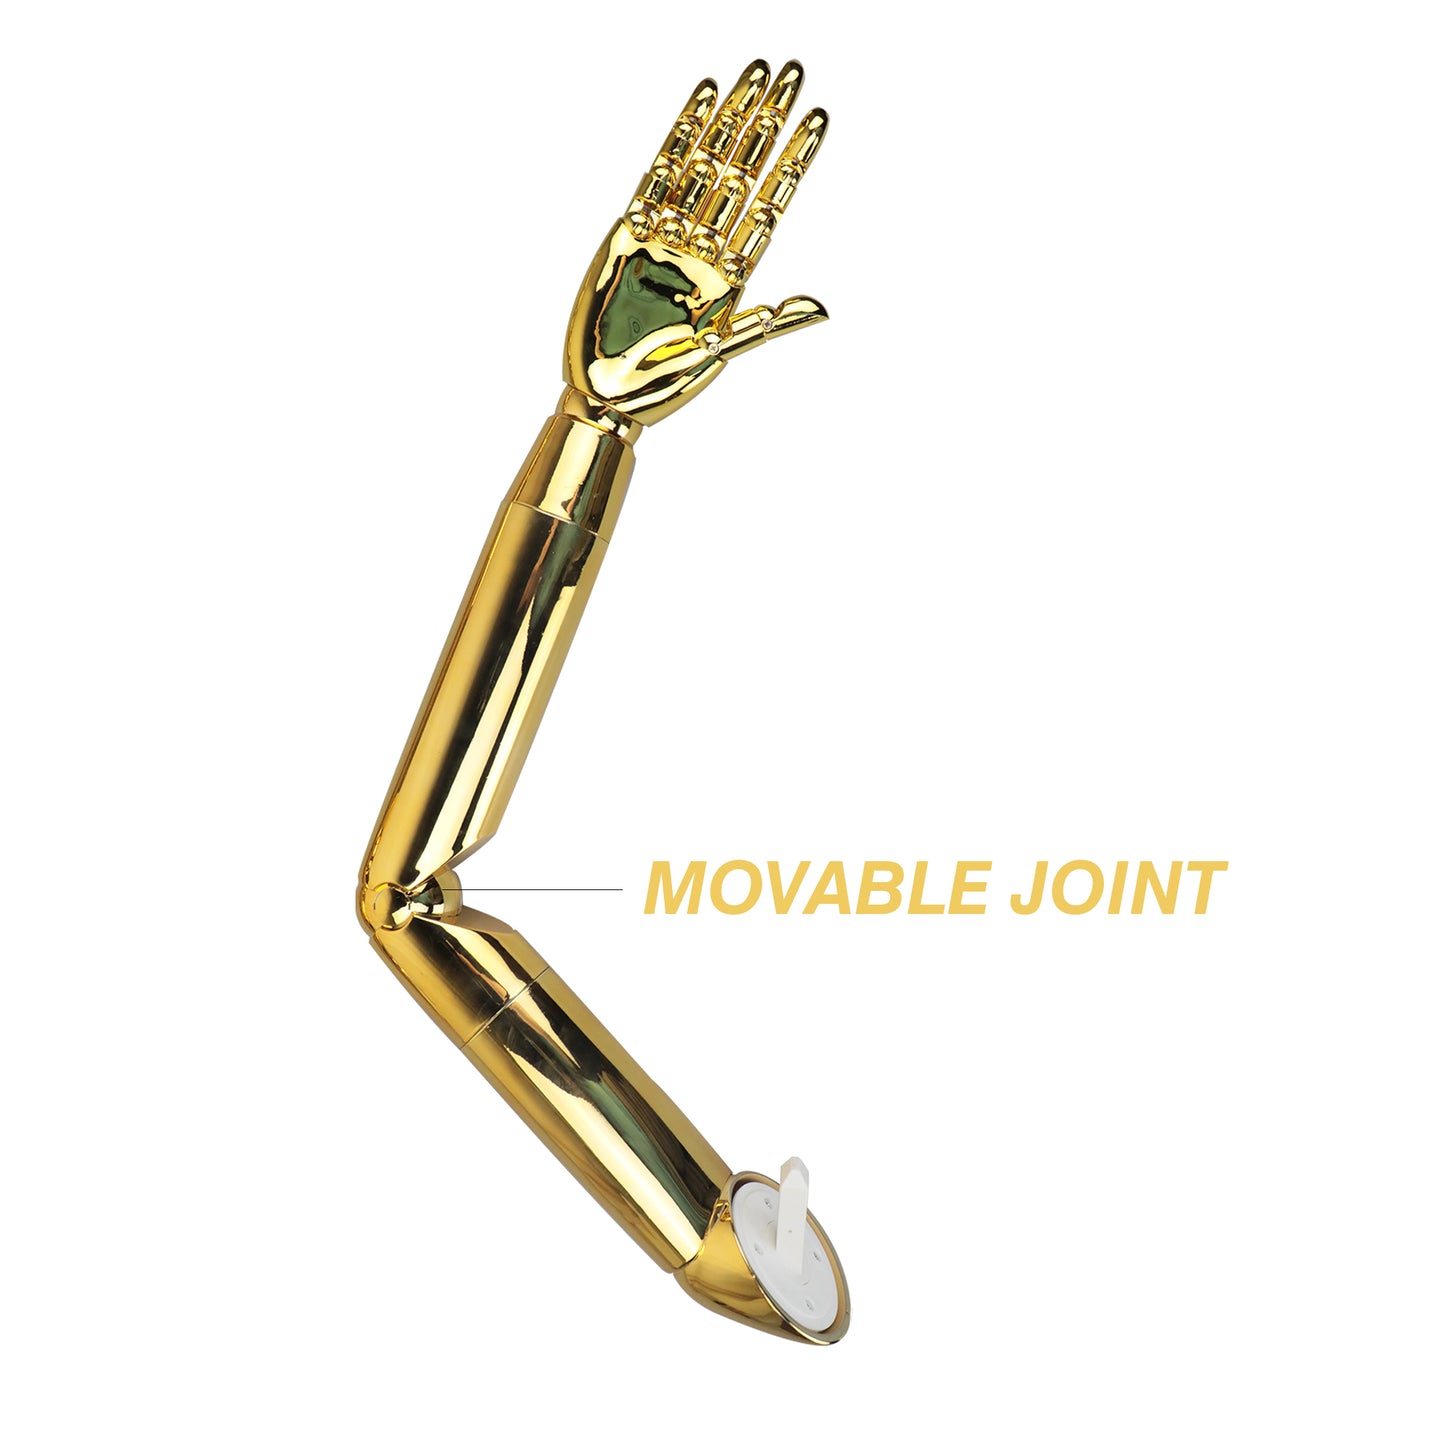 Jelimate Silver Gold Female Mannequin Hand Form,Chrome Golden Movable Joint Hand Model Props,Glove Ring Jewelry Display Mannequin Hand Stand